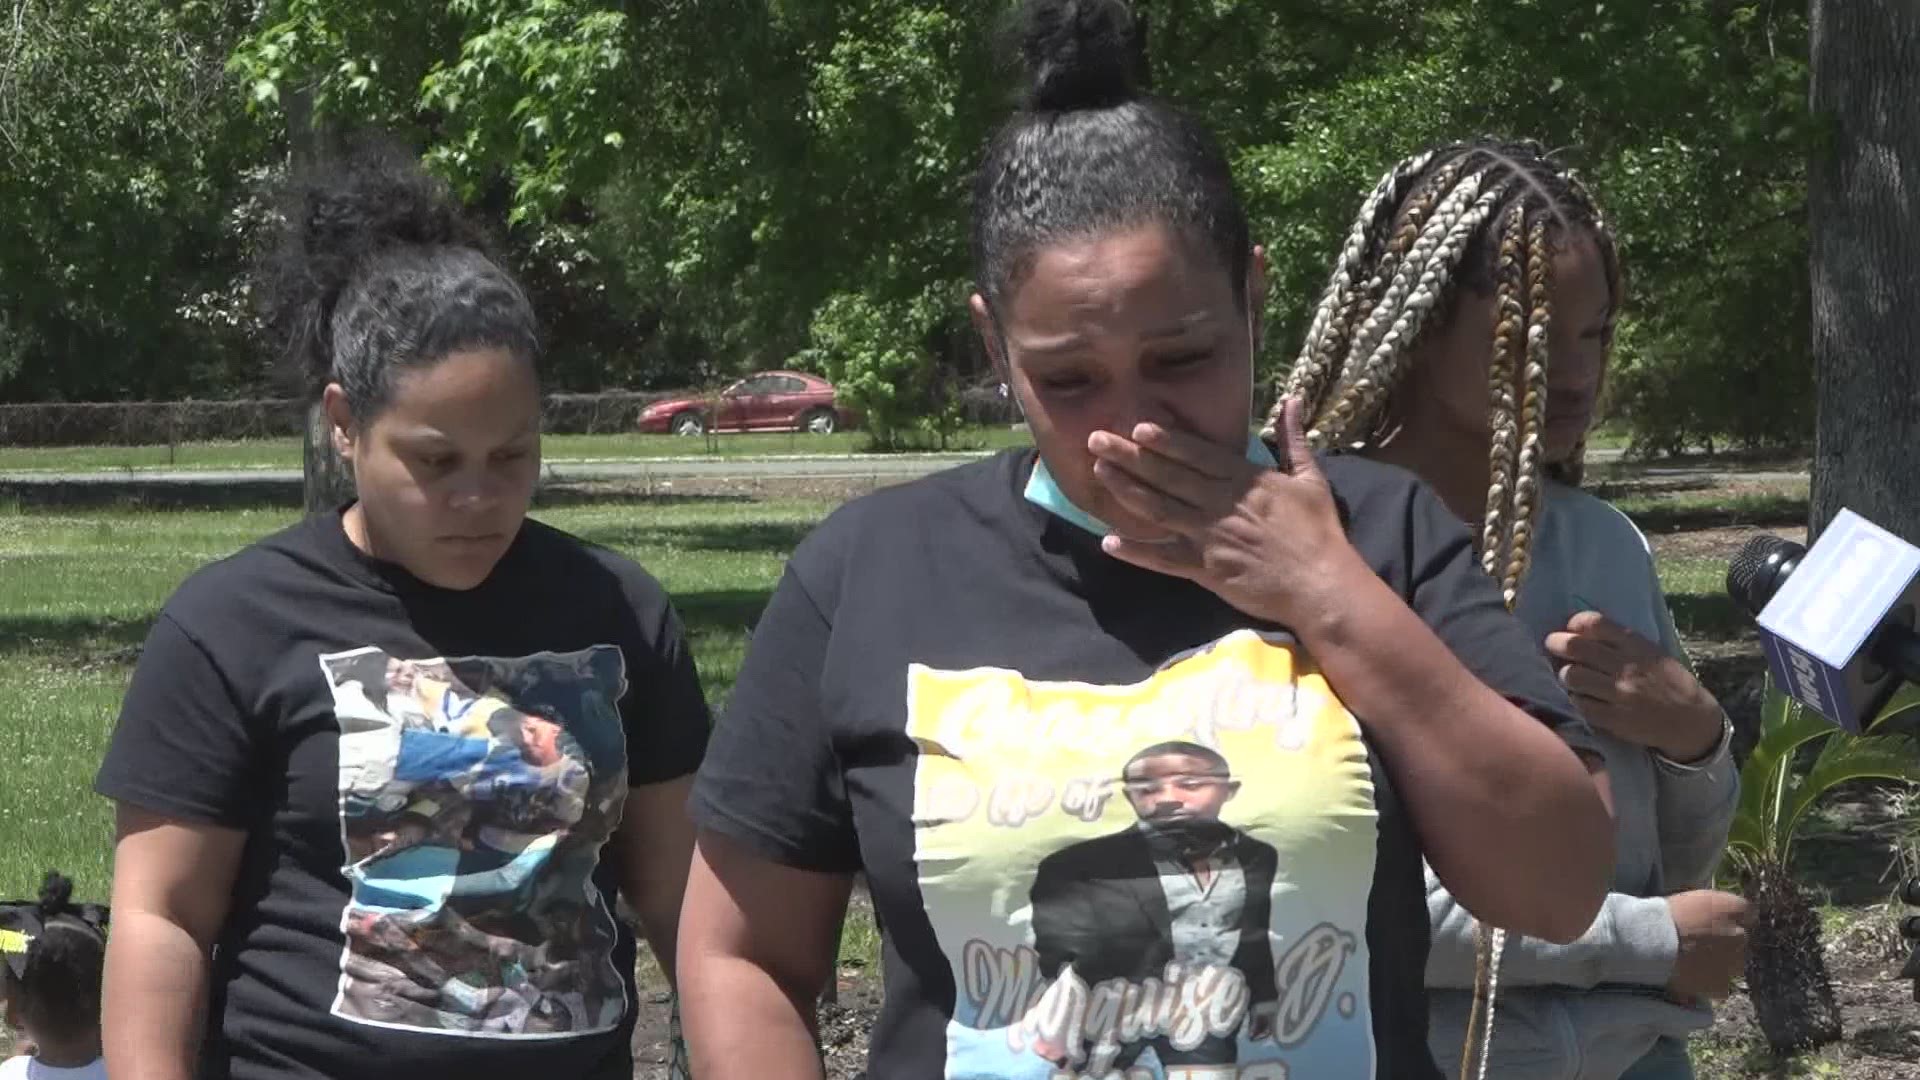 Two months after he went missing after a party and ended up in Lake Pontchartrain, the mother of Marquise Jones is looking for answers on his killer.